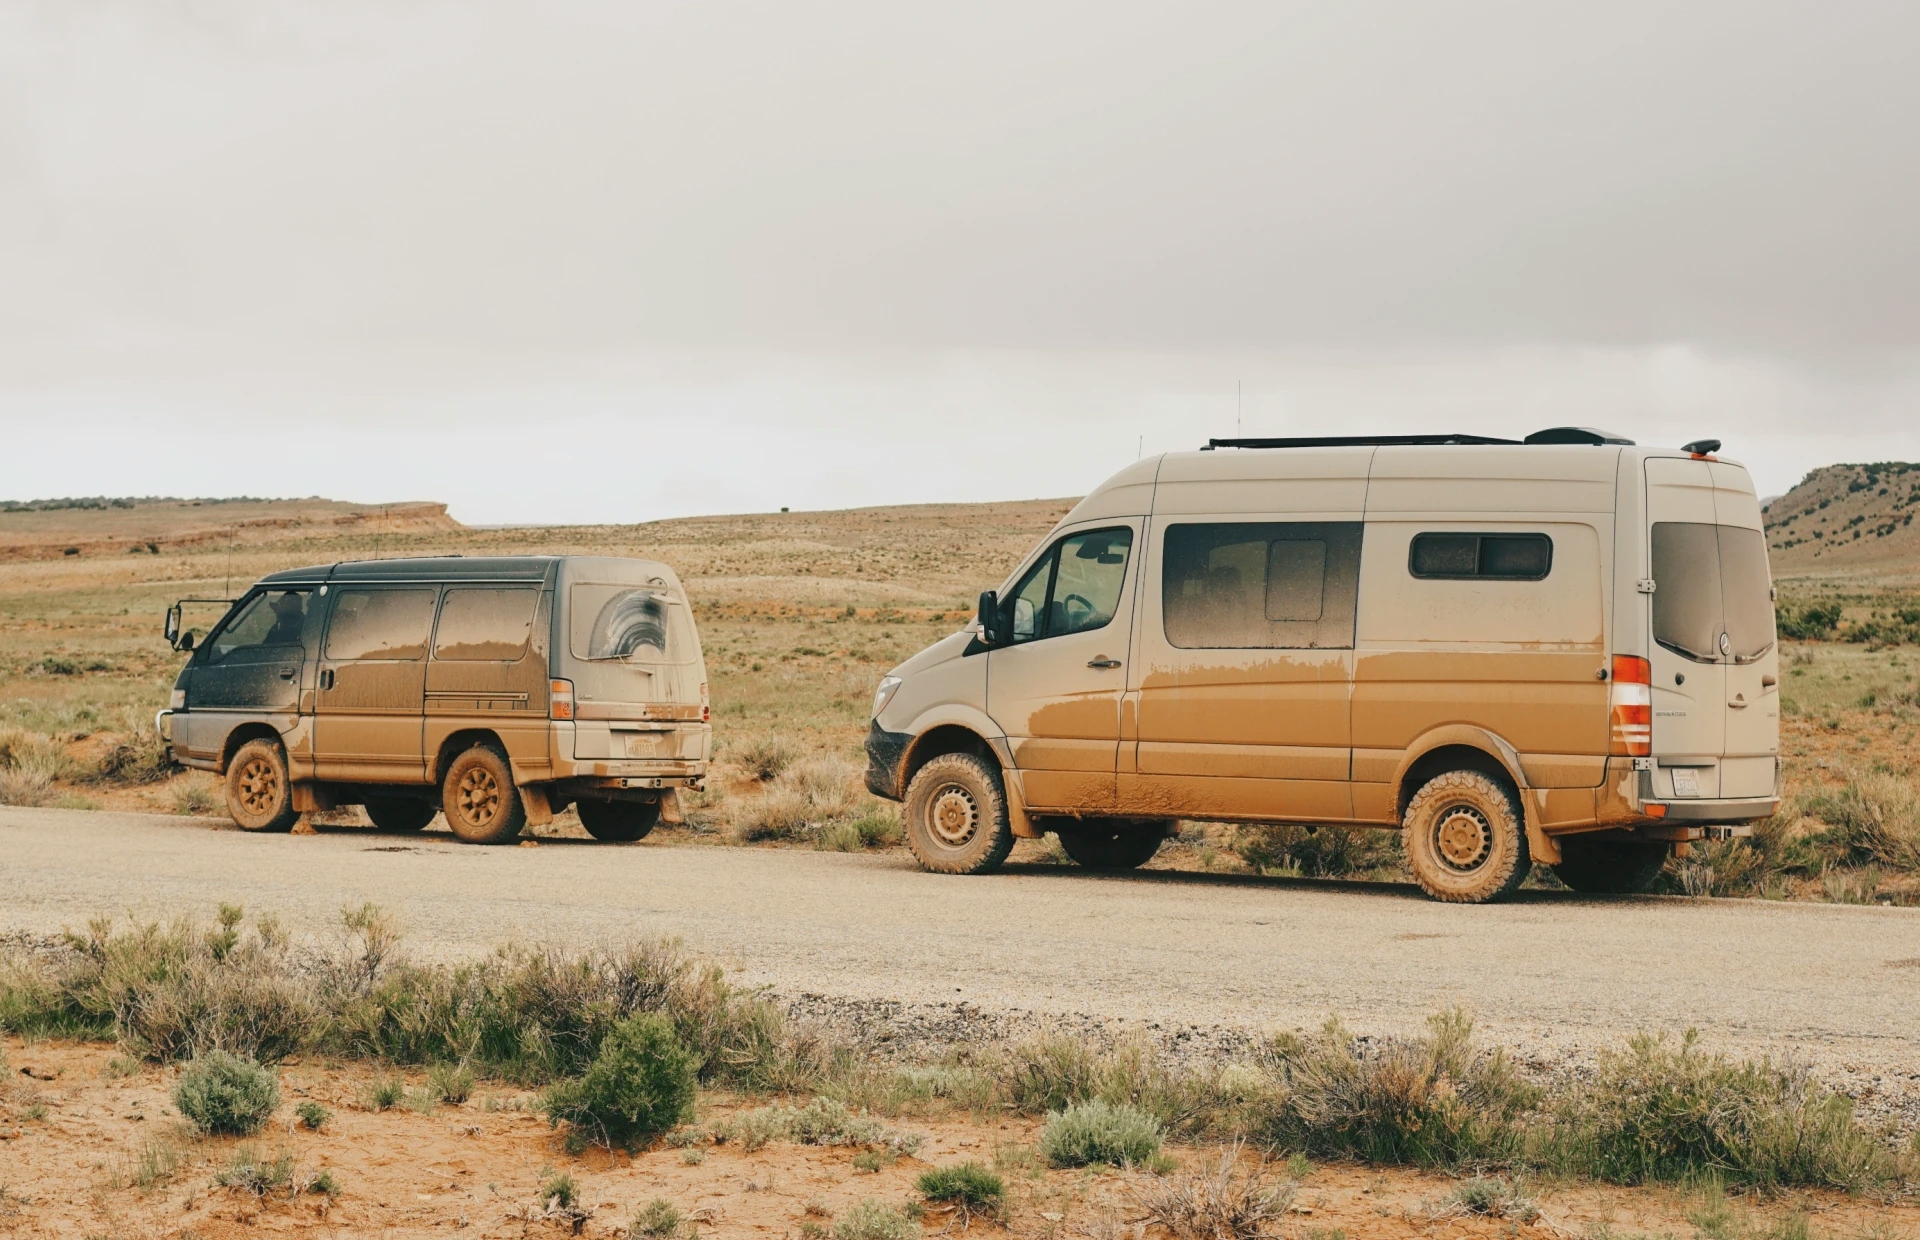 image of very muddy sprinter van next to a smaller mitsubishi van also covered in mud on the side of the road in utah